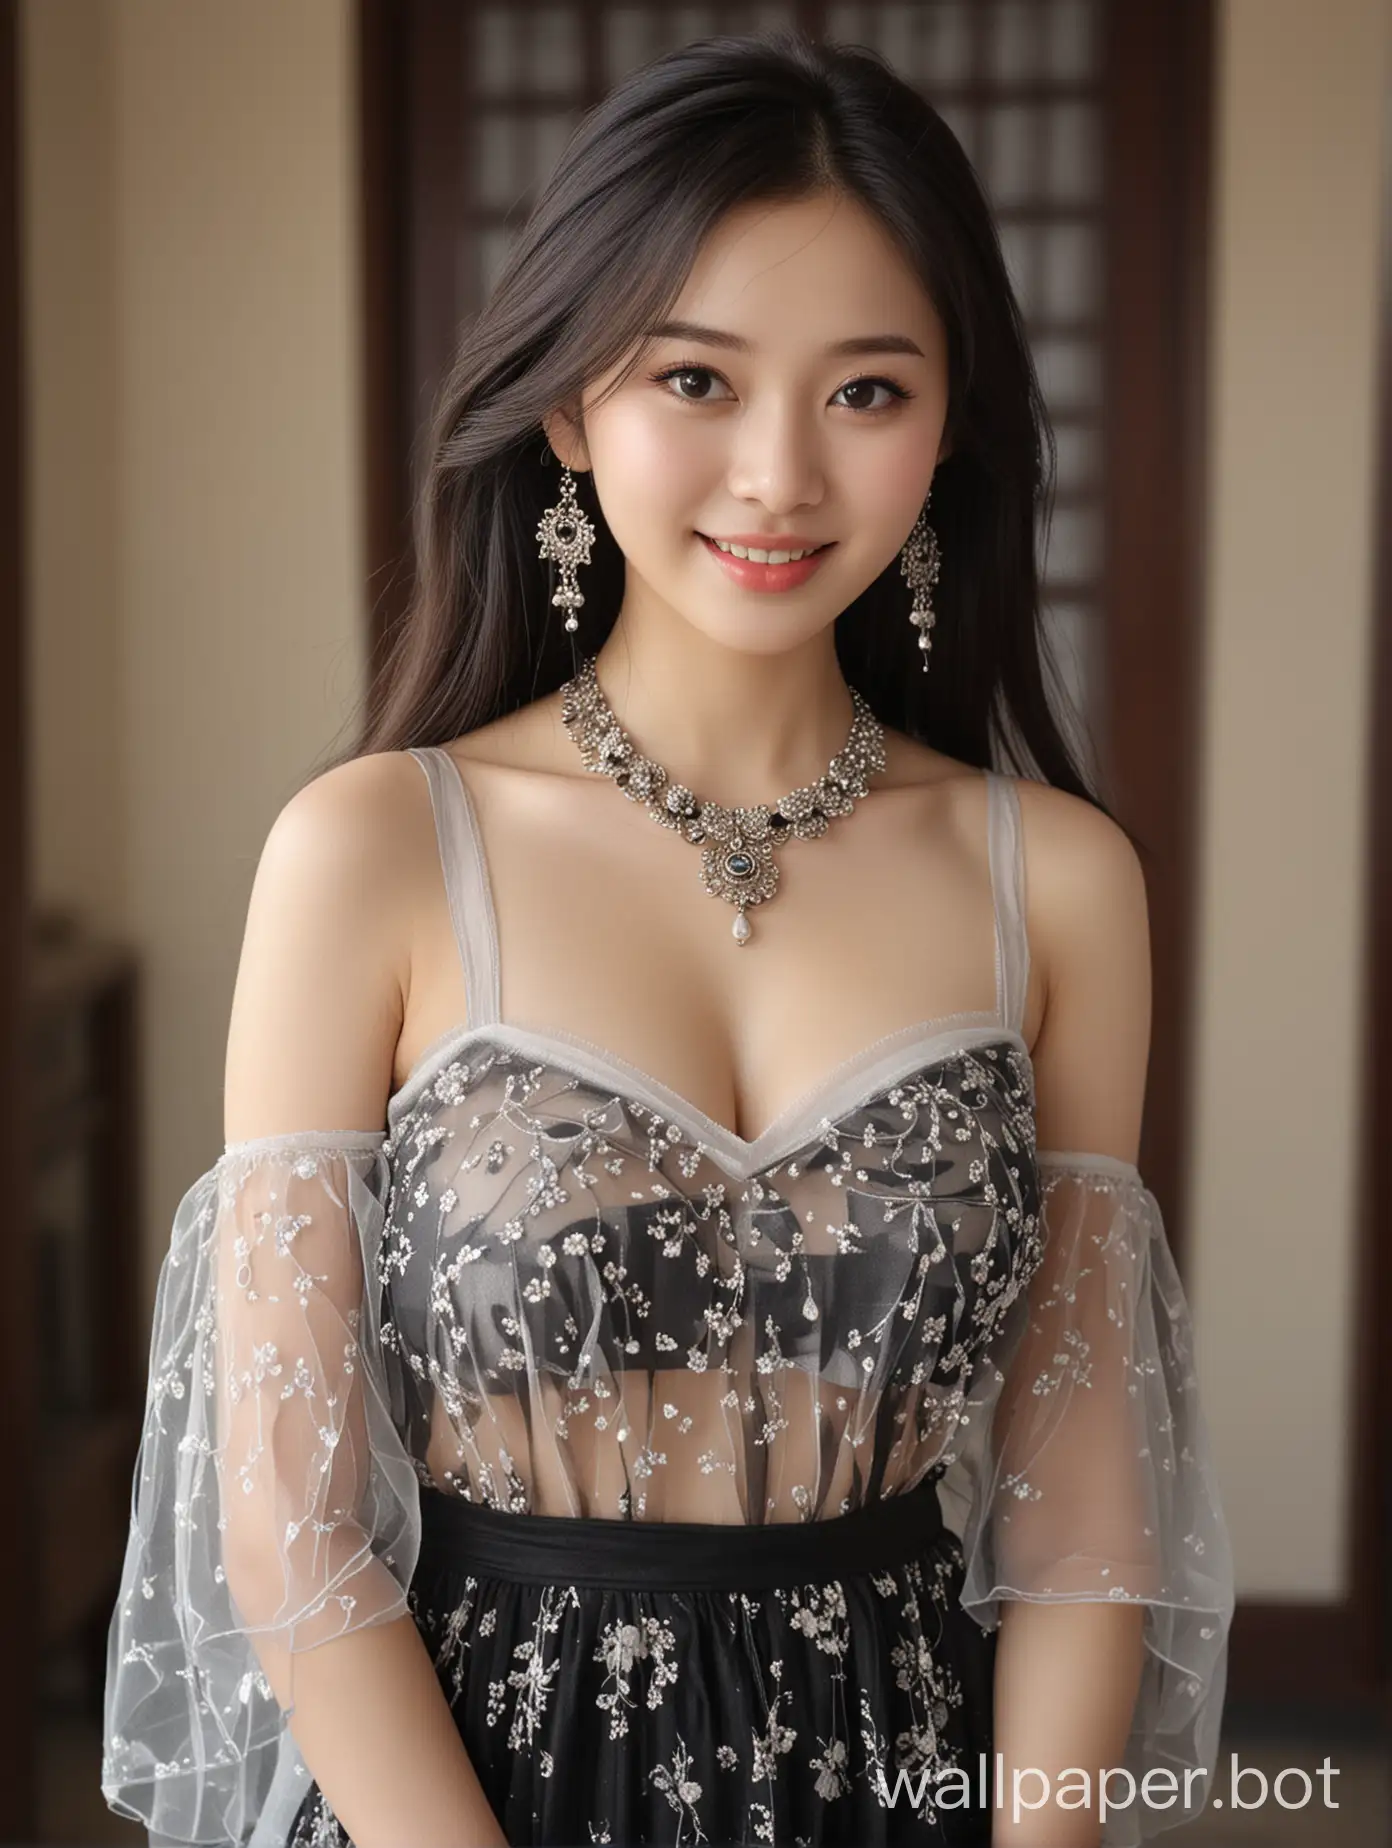 Generate an image of most beautiful (Shaanxi Provinces china) actress big tits cute pretty girl 18 years old ,  A-line Dress Transparent  ,  with a fair skin tone and long hair black. She has a round smile face . The background is a modern house interior. The camera shot captures her from head to stomach . She is wearing makeup and has a necklace , jhumka ear ring and bracelet on.